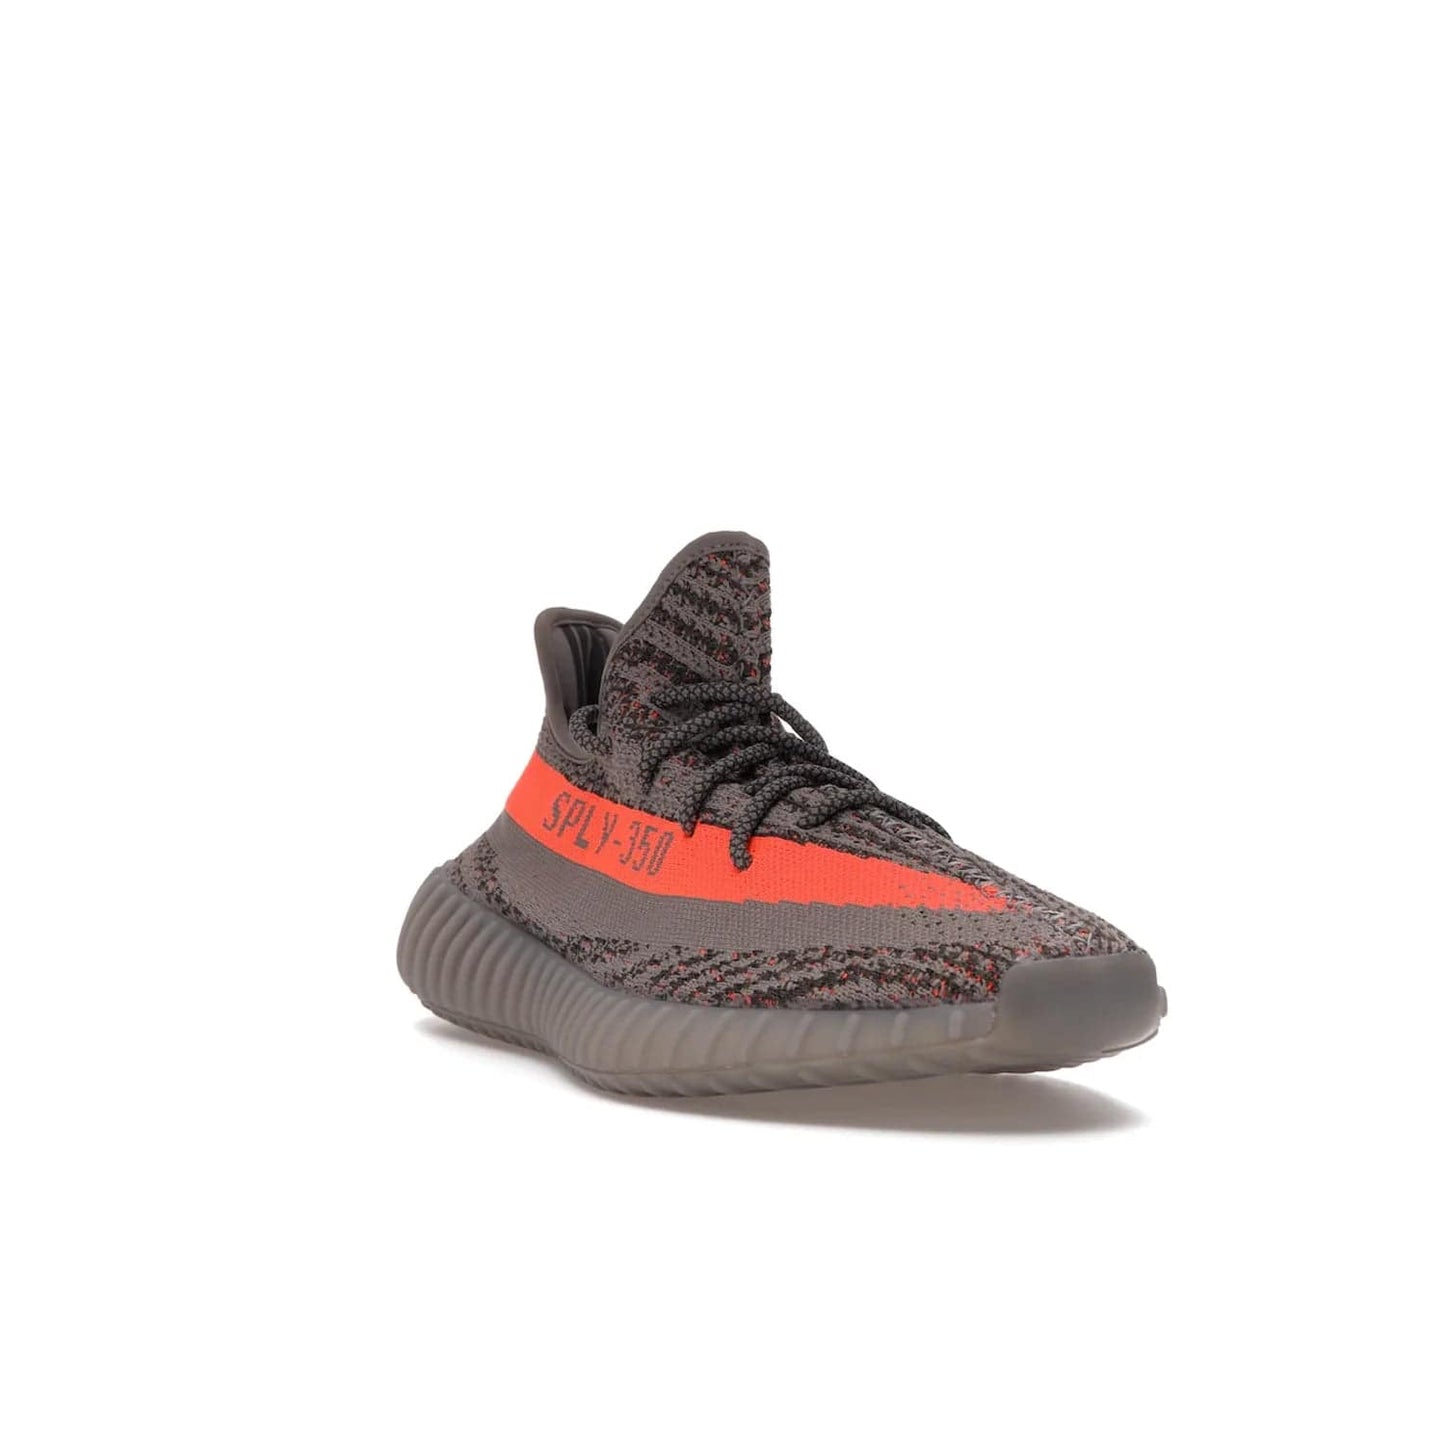 adidas Yeezy Boost 350 V2 Beluga Reflective - Image 7 - Only at www.BallersClubKickz.com - Shop the adidas Yeezy Boost 350 V2 Beluga Reflective: a stylish, reflective sneaker that stands out. Featuring Boost sole, Primeknit upper & signature orange stripe. Available Dec 2021.